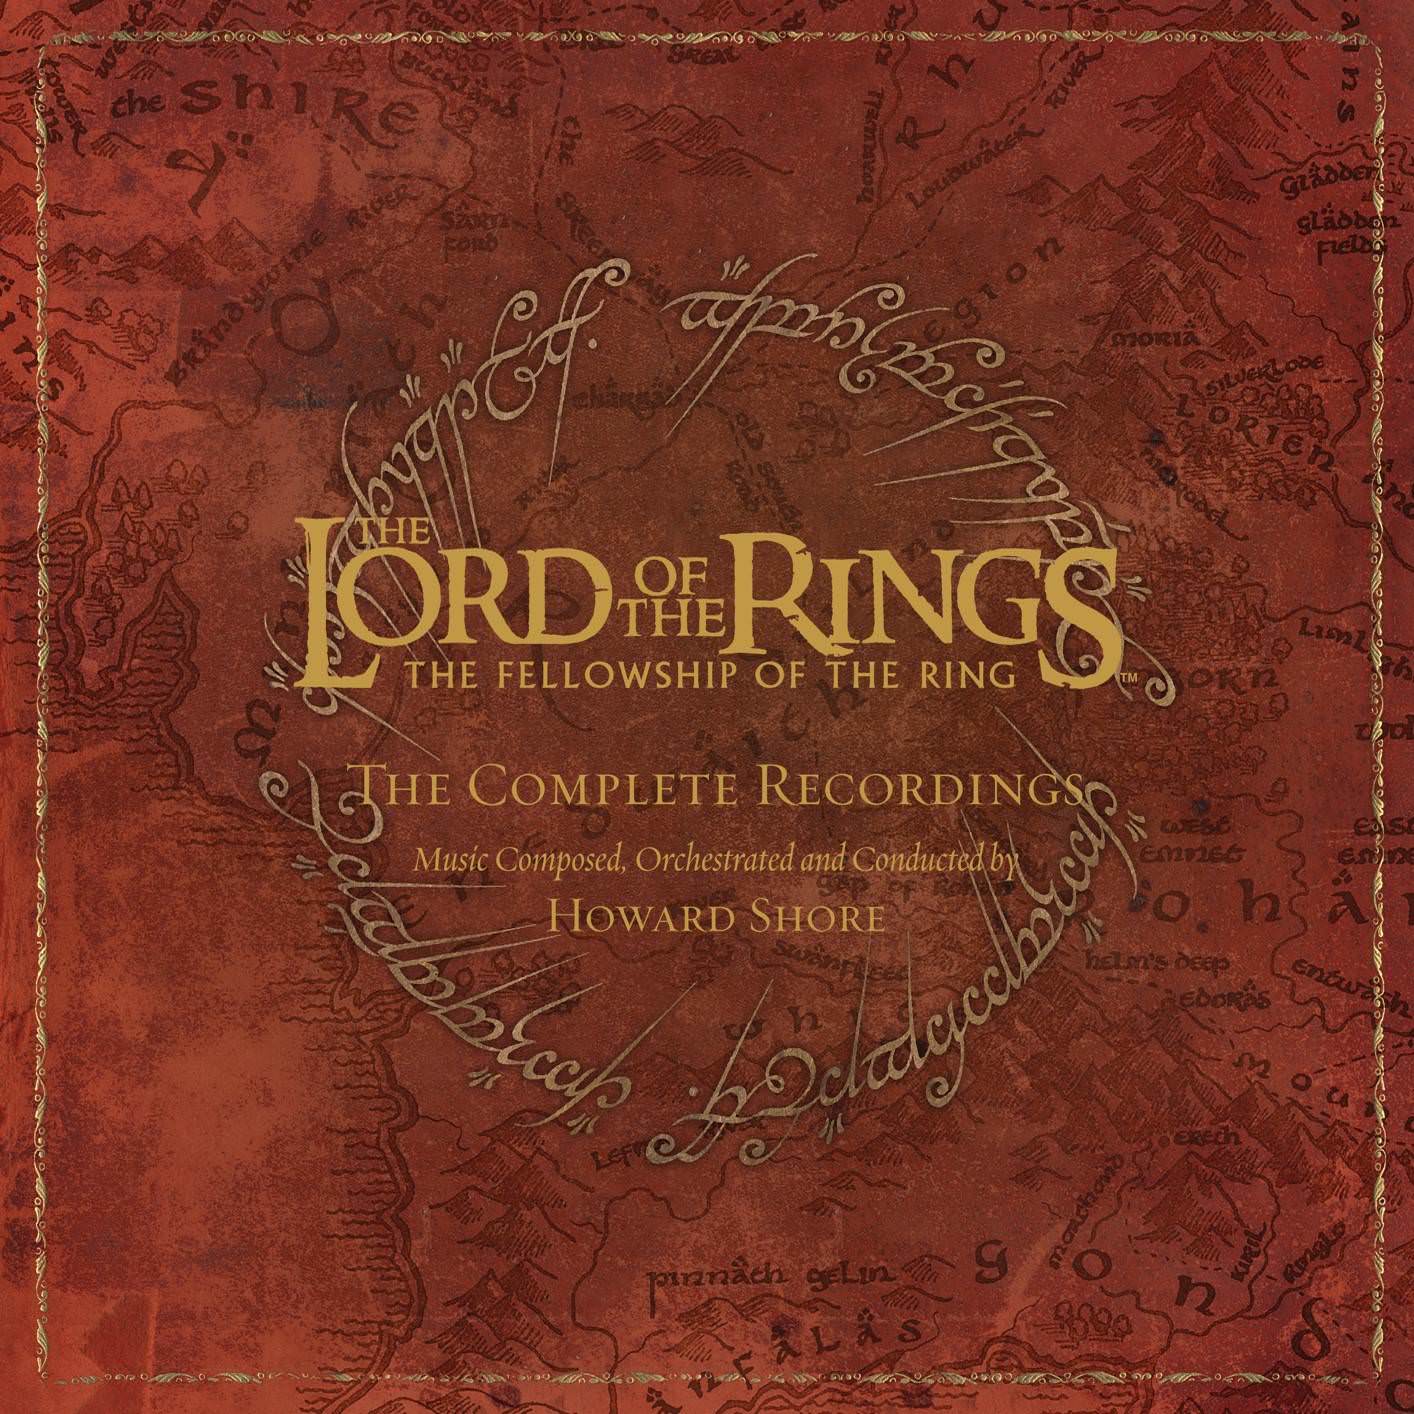 Howard Shore - The Lord Of The Rings: The Fellowship Of The Ring - The Complete Recordings (2005/2018) [FLAC 24bit/48kHz]